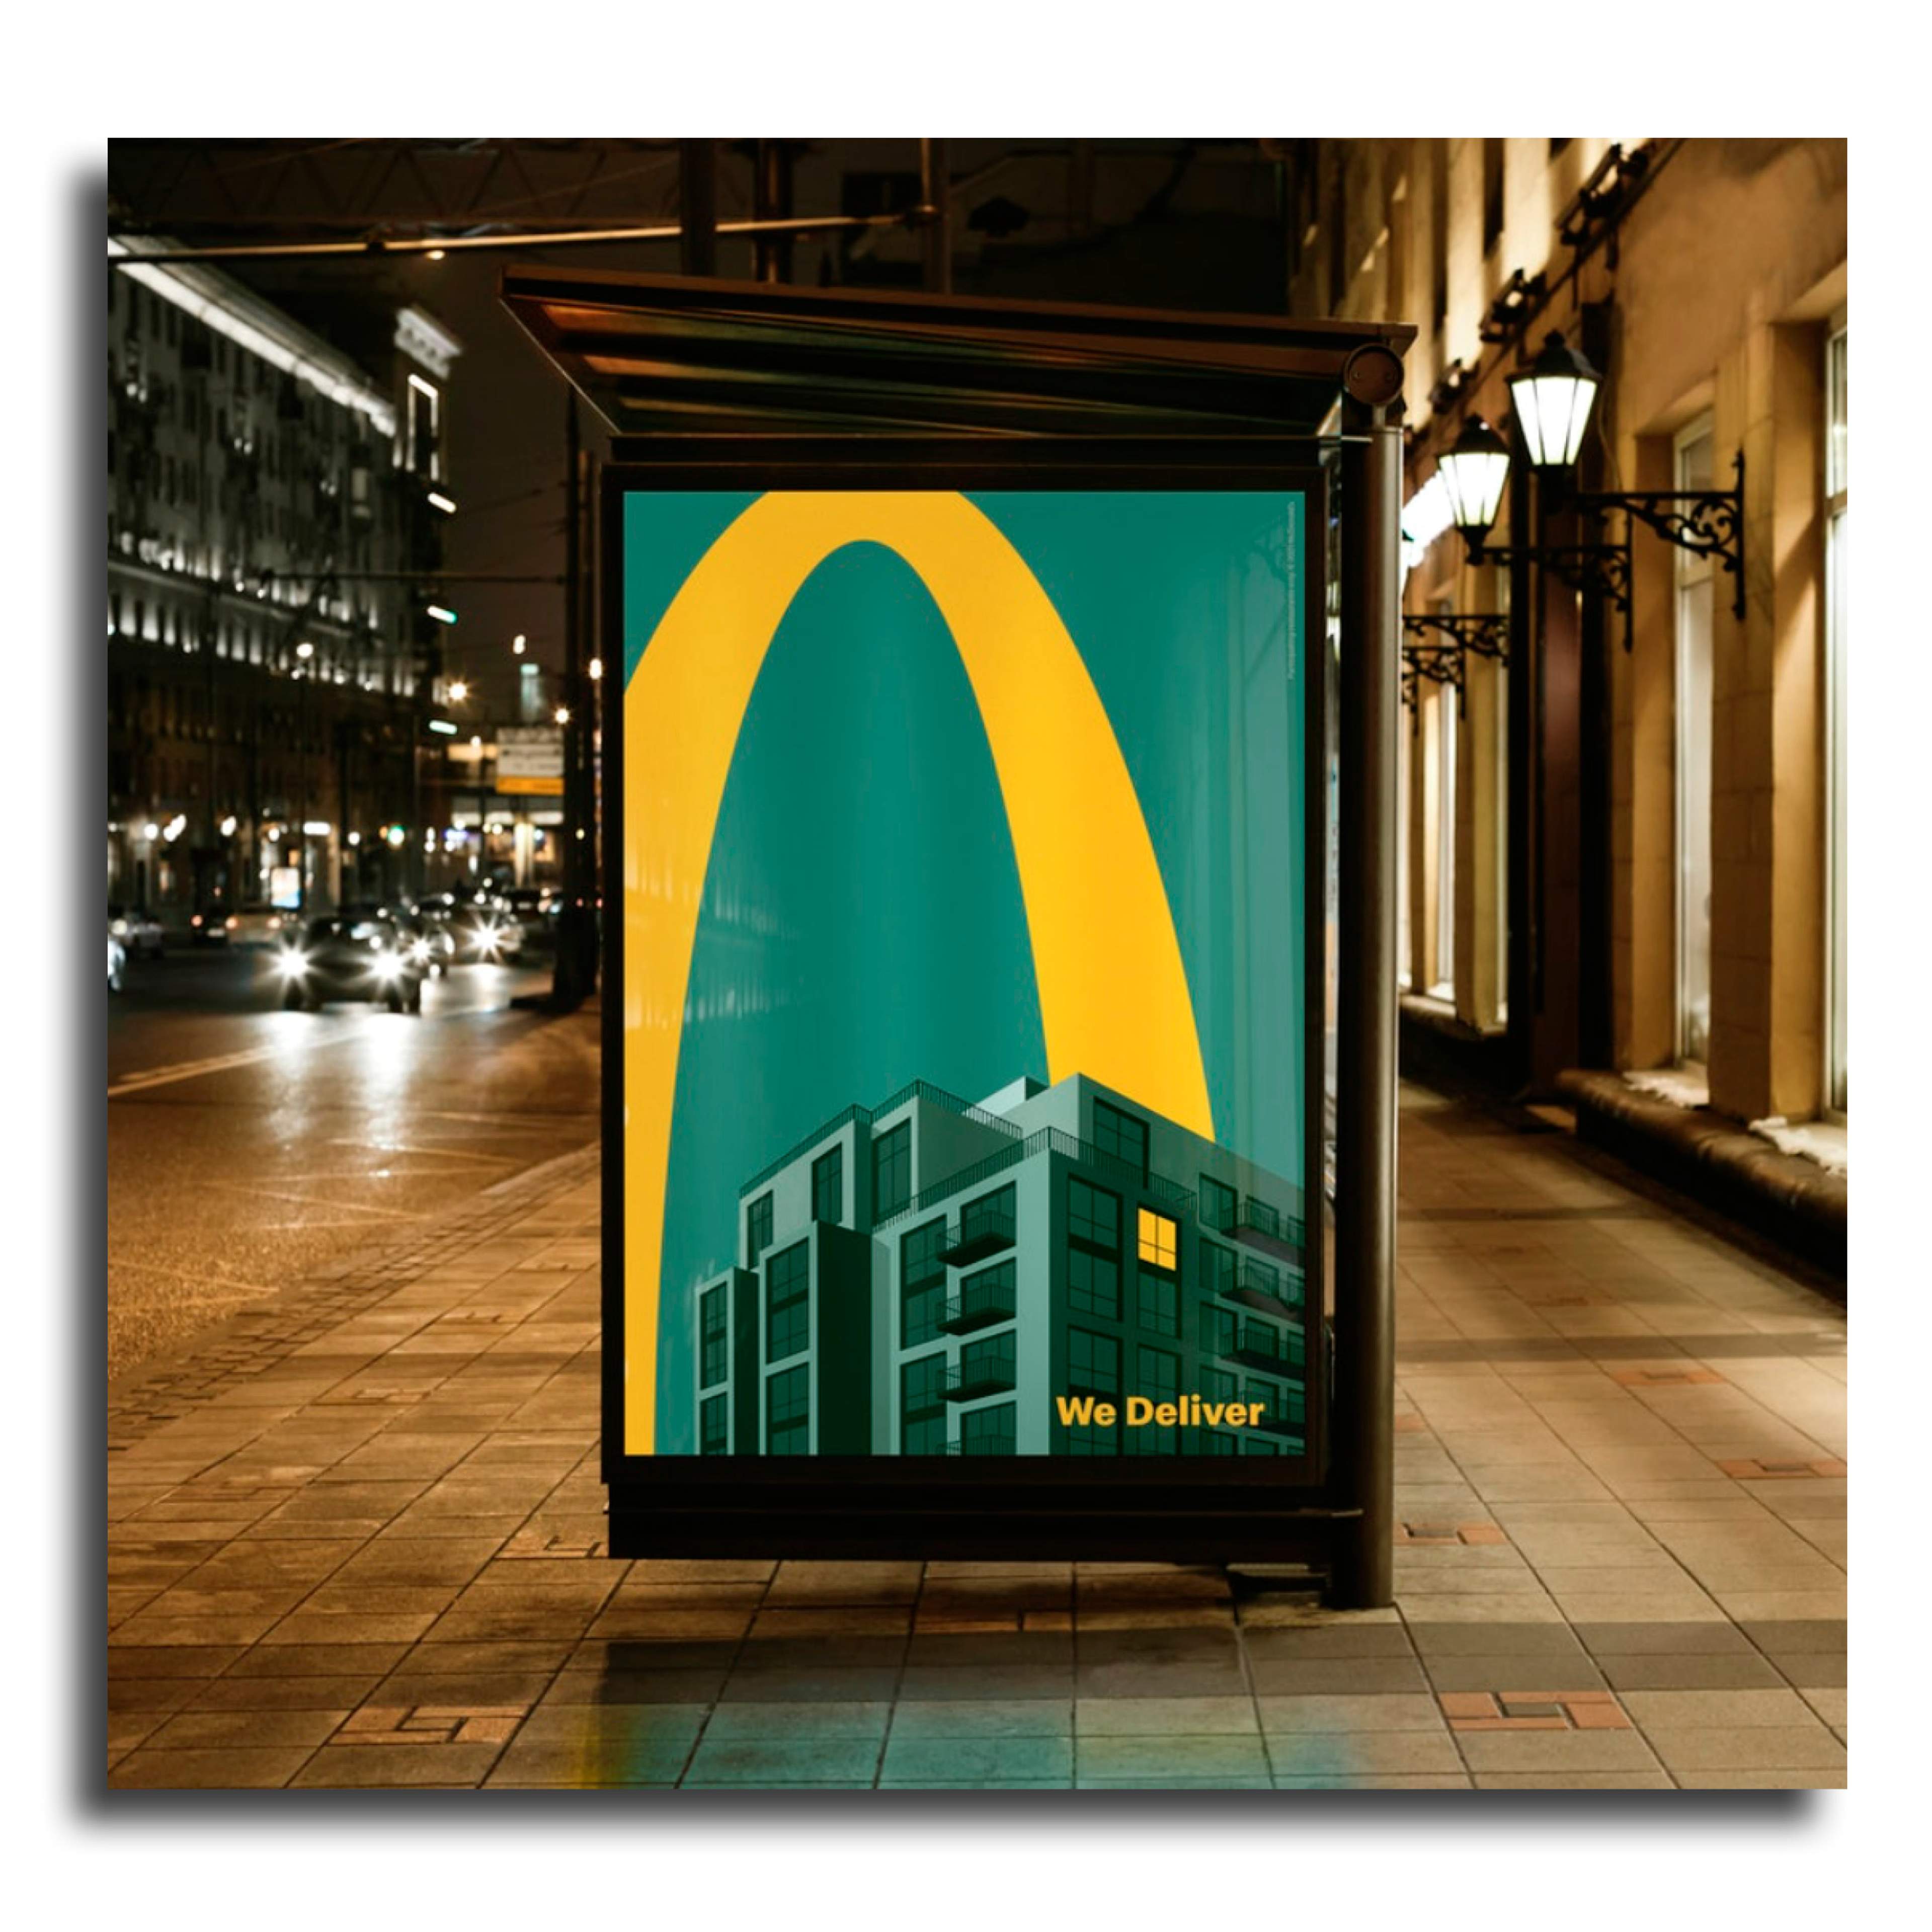 Photograph of a McDonald's Adshel poster using the McDonald's logo to show delivery at night.